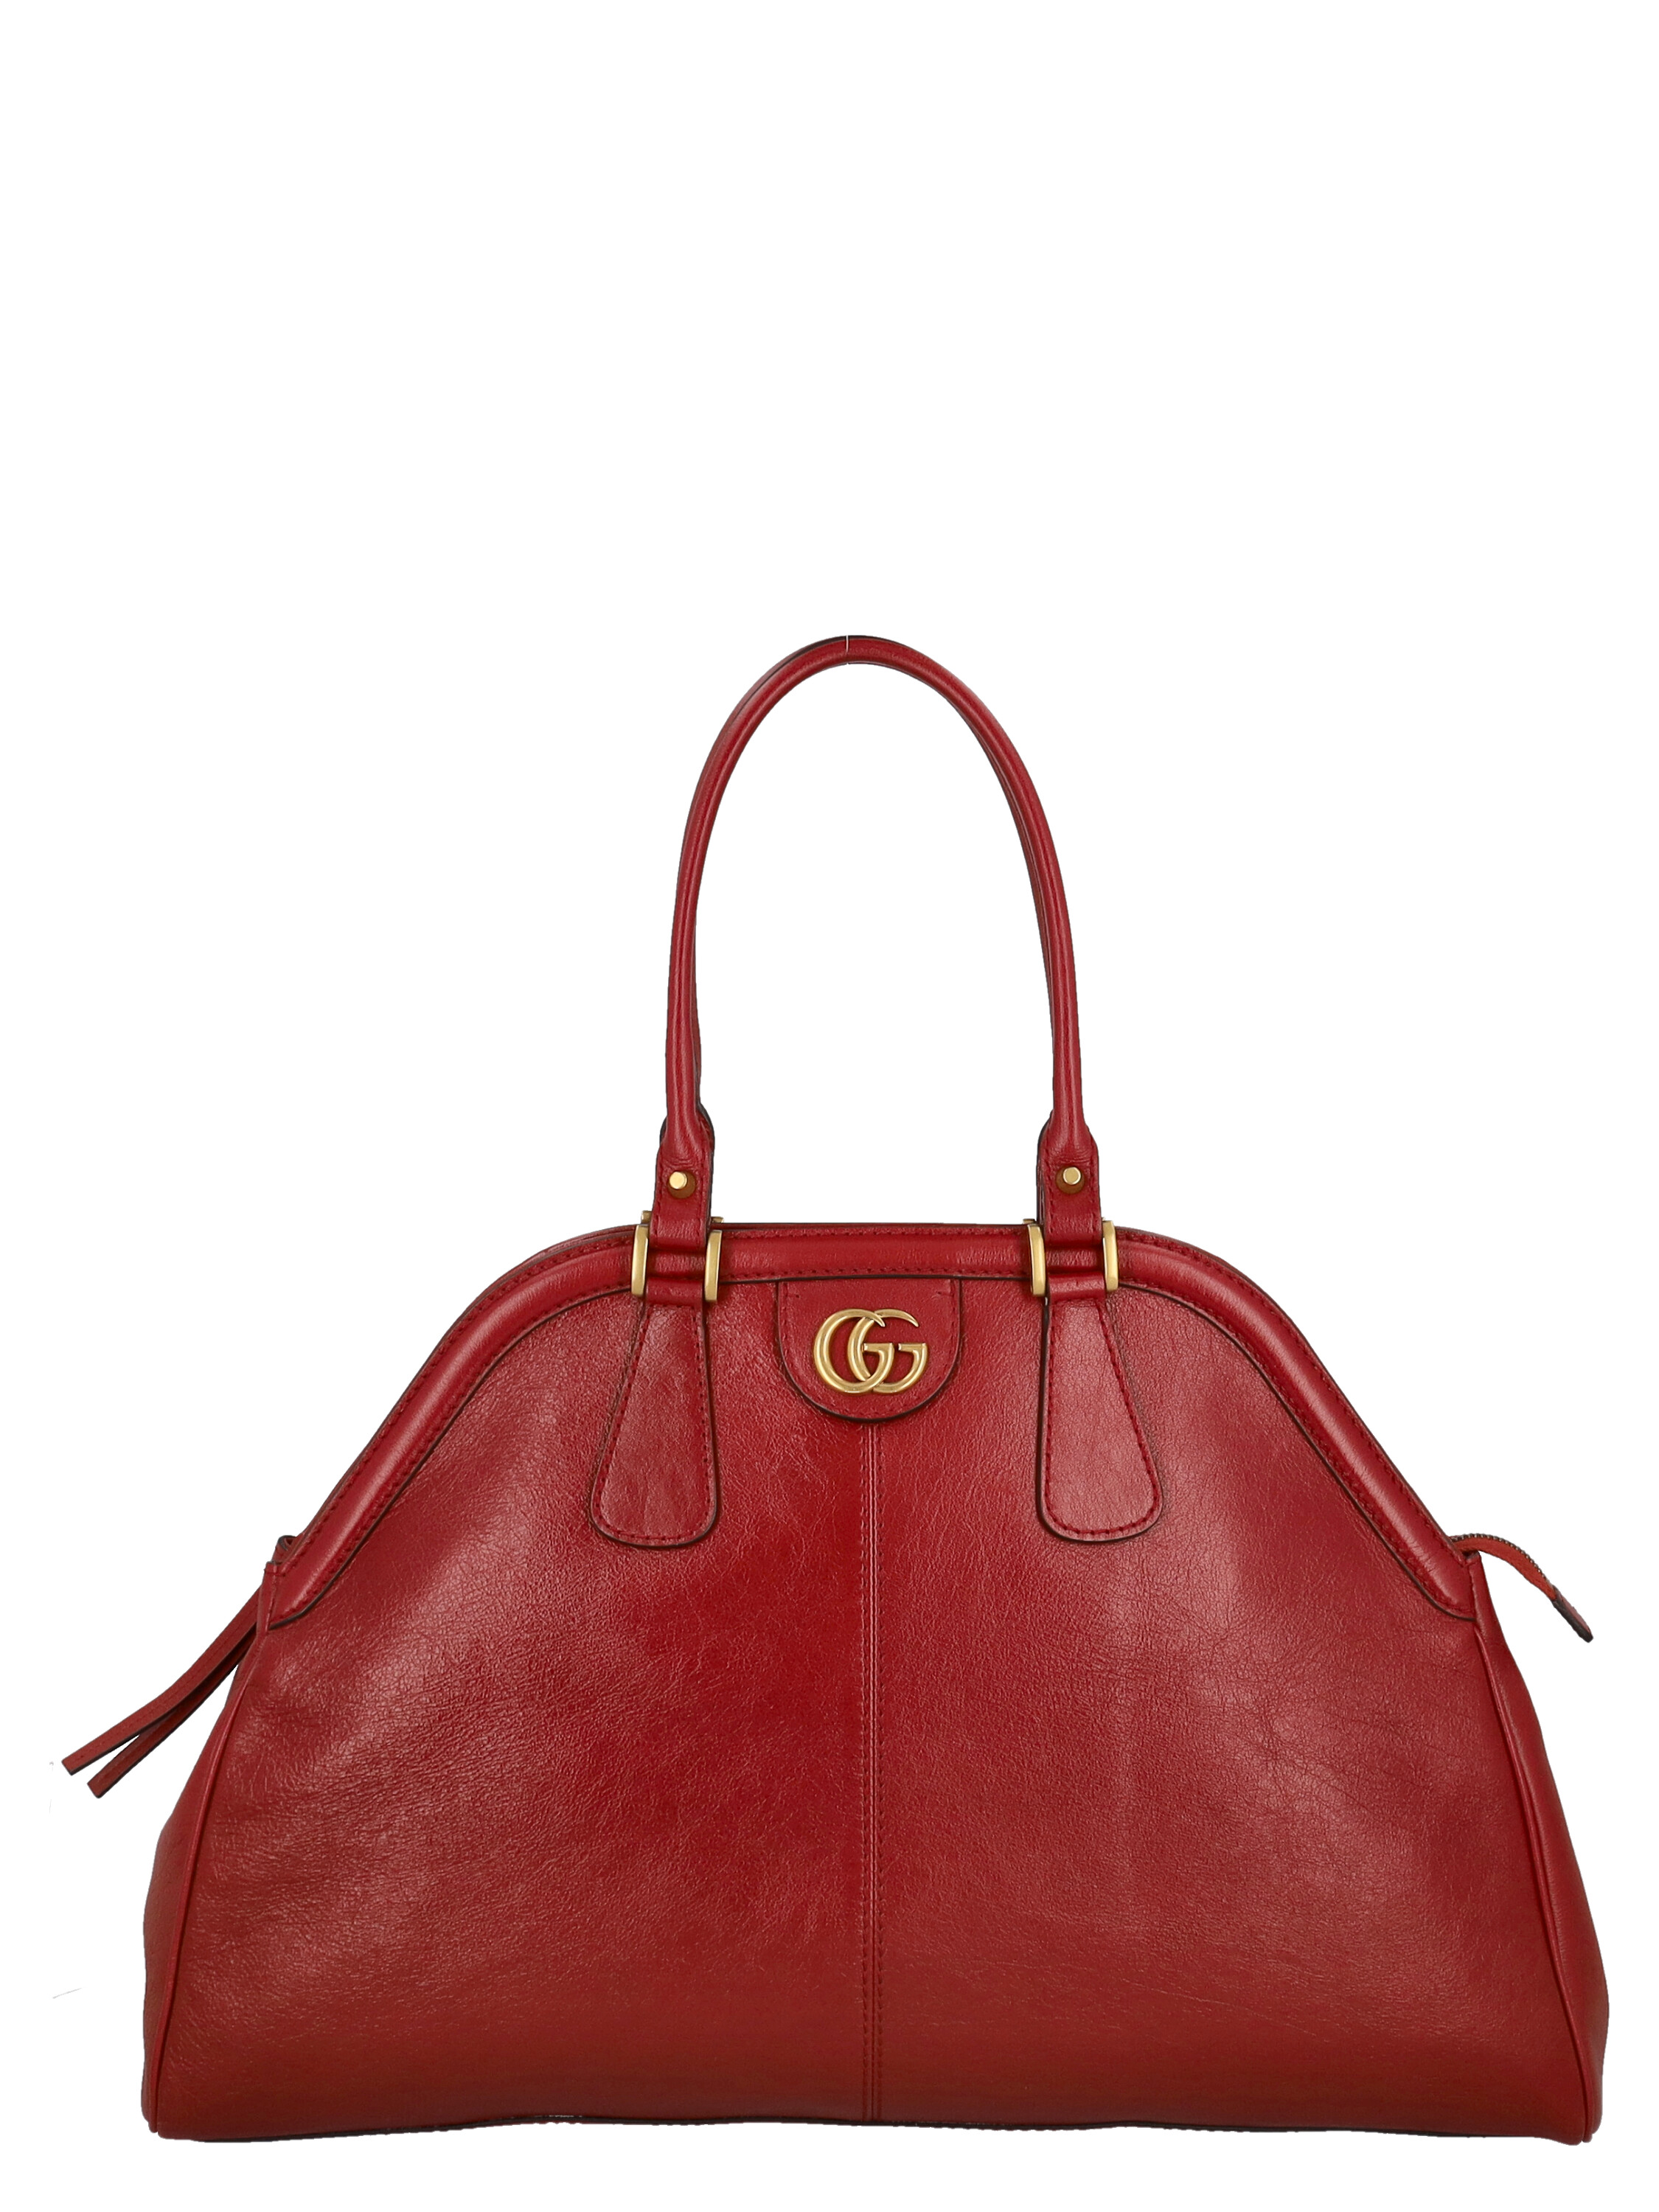 Pre-owned Gucci Women's Shoulder Bags -  - In Burgundy Leather